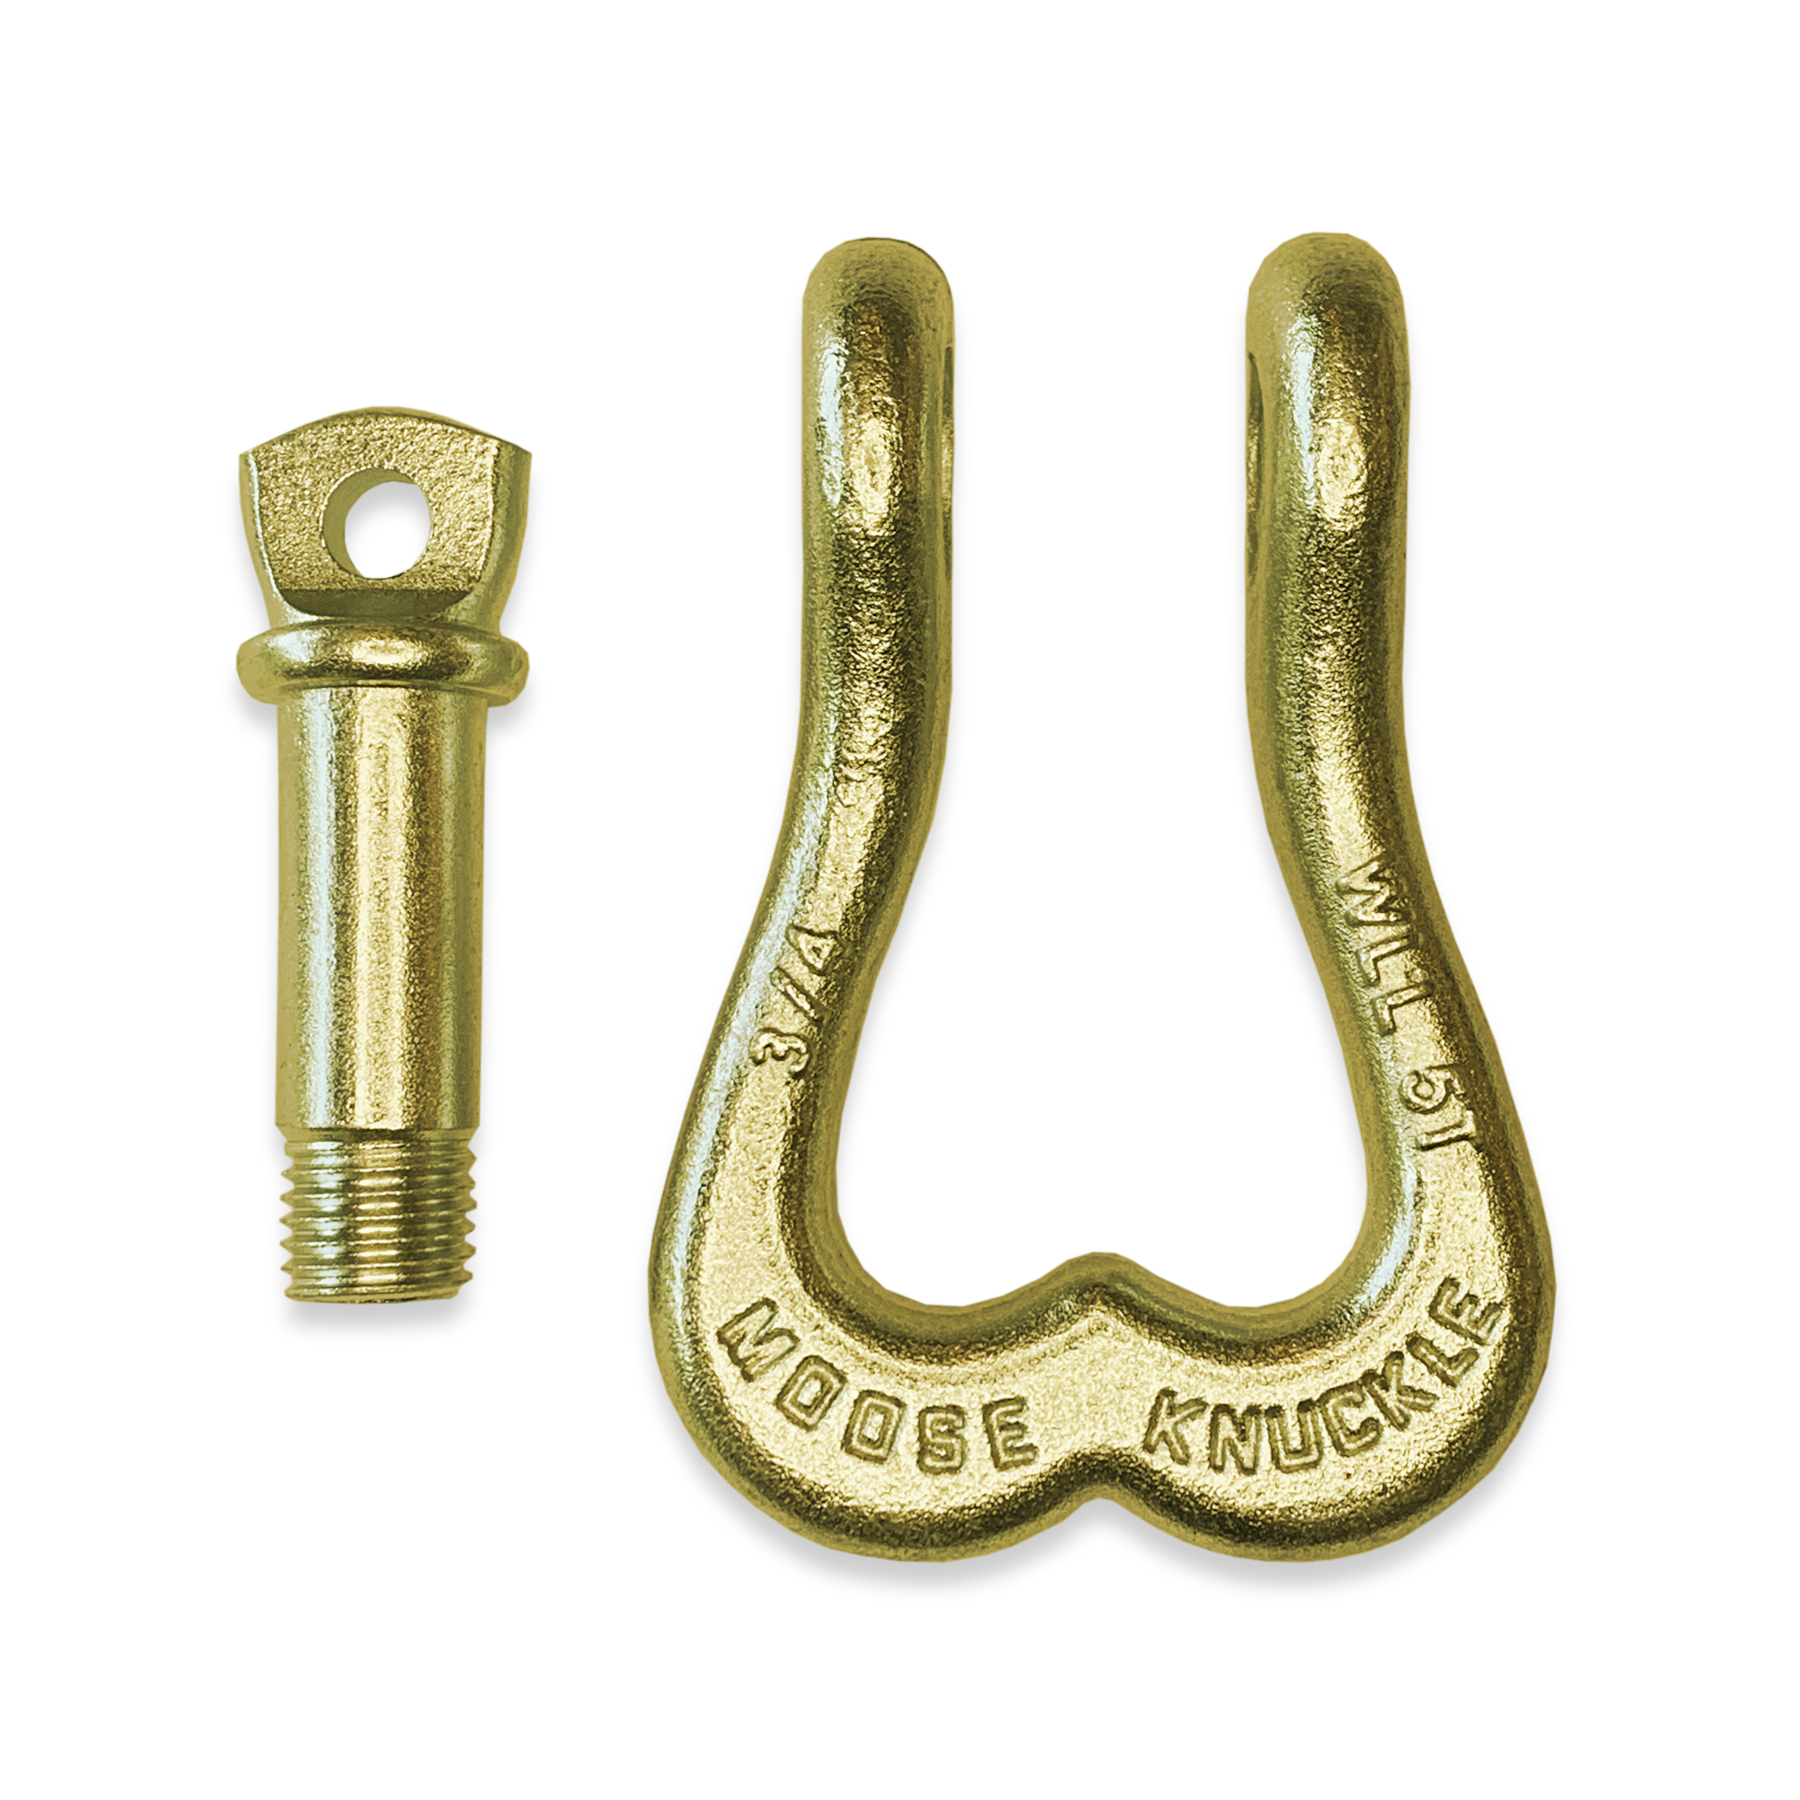 Moose Knuckle XL Brass Knuckle Heavy Duty Extra Strong Patent Pending 3/4" Shackle for Off-Road Vehicle Recovery to Replace Bull Balls